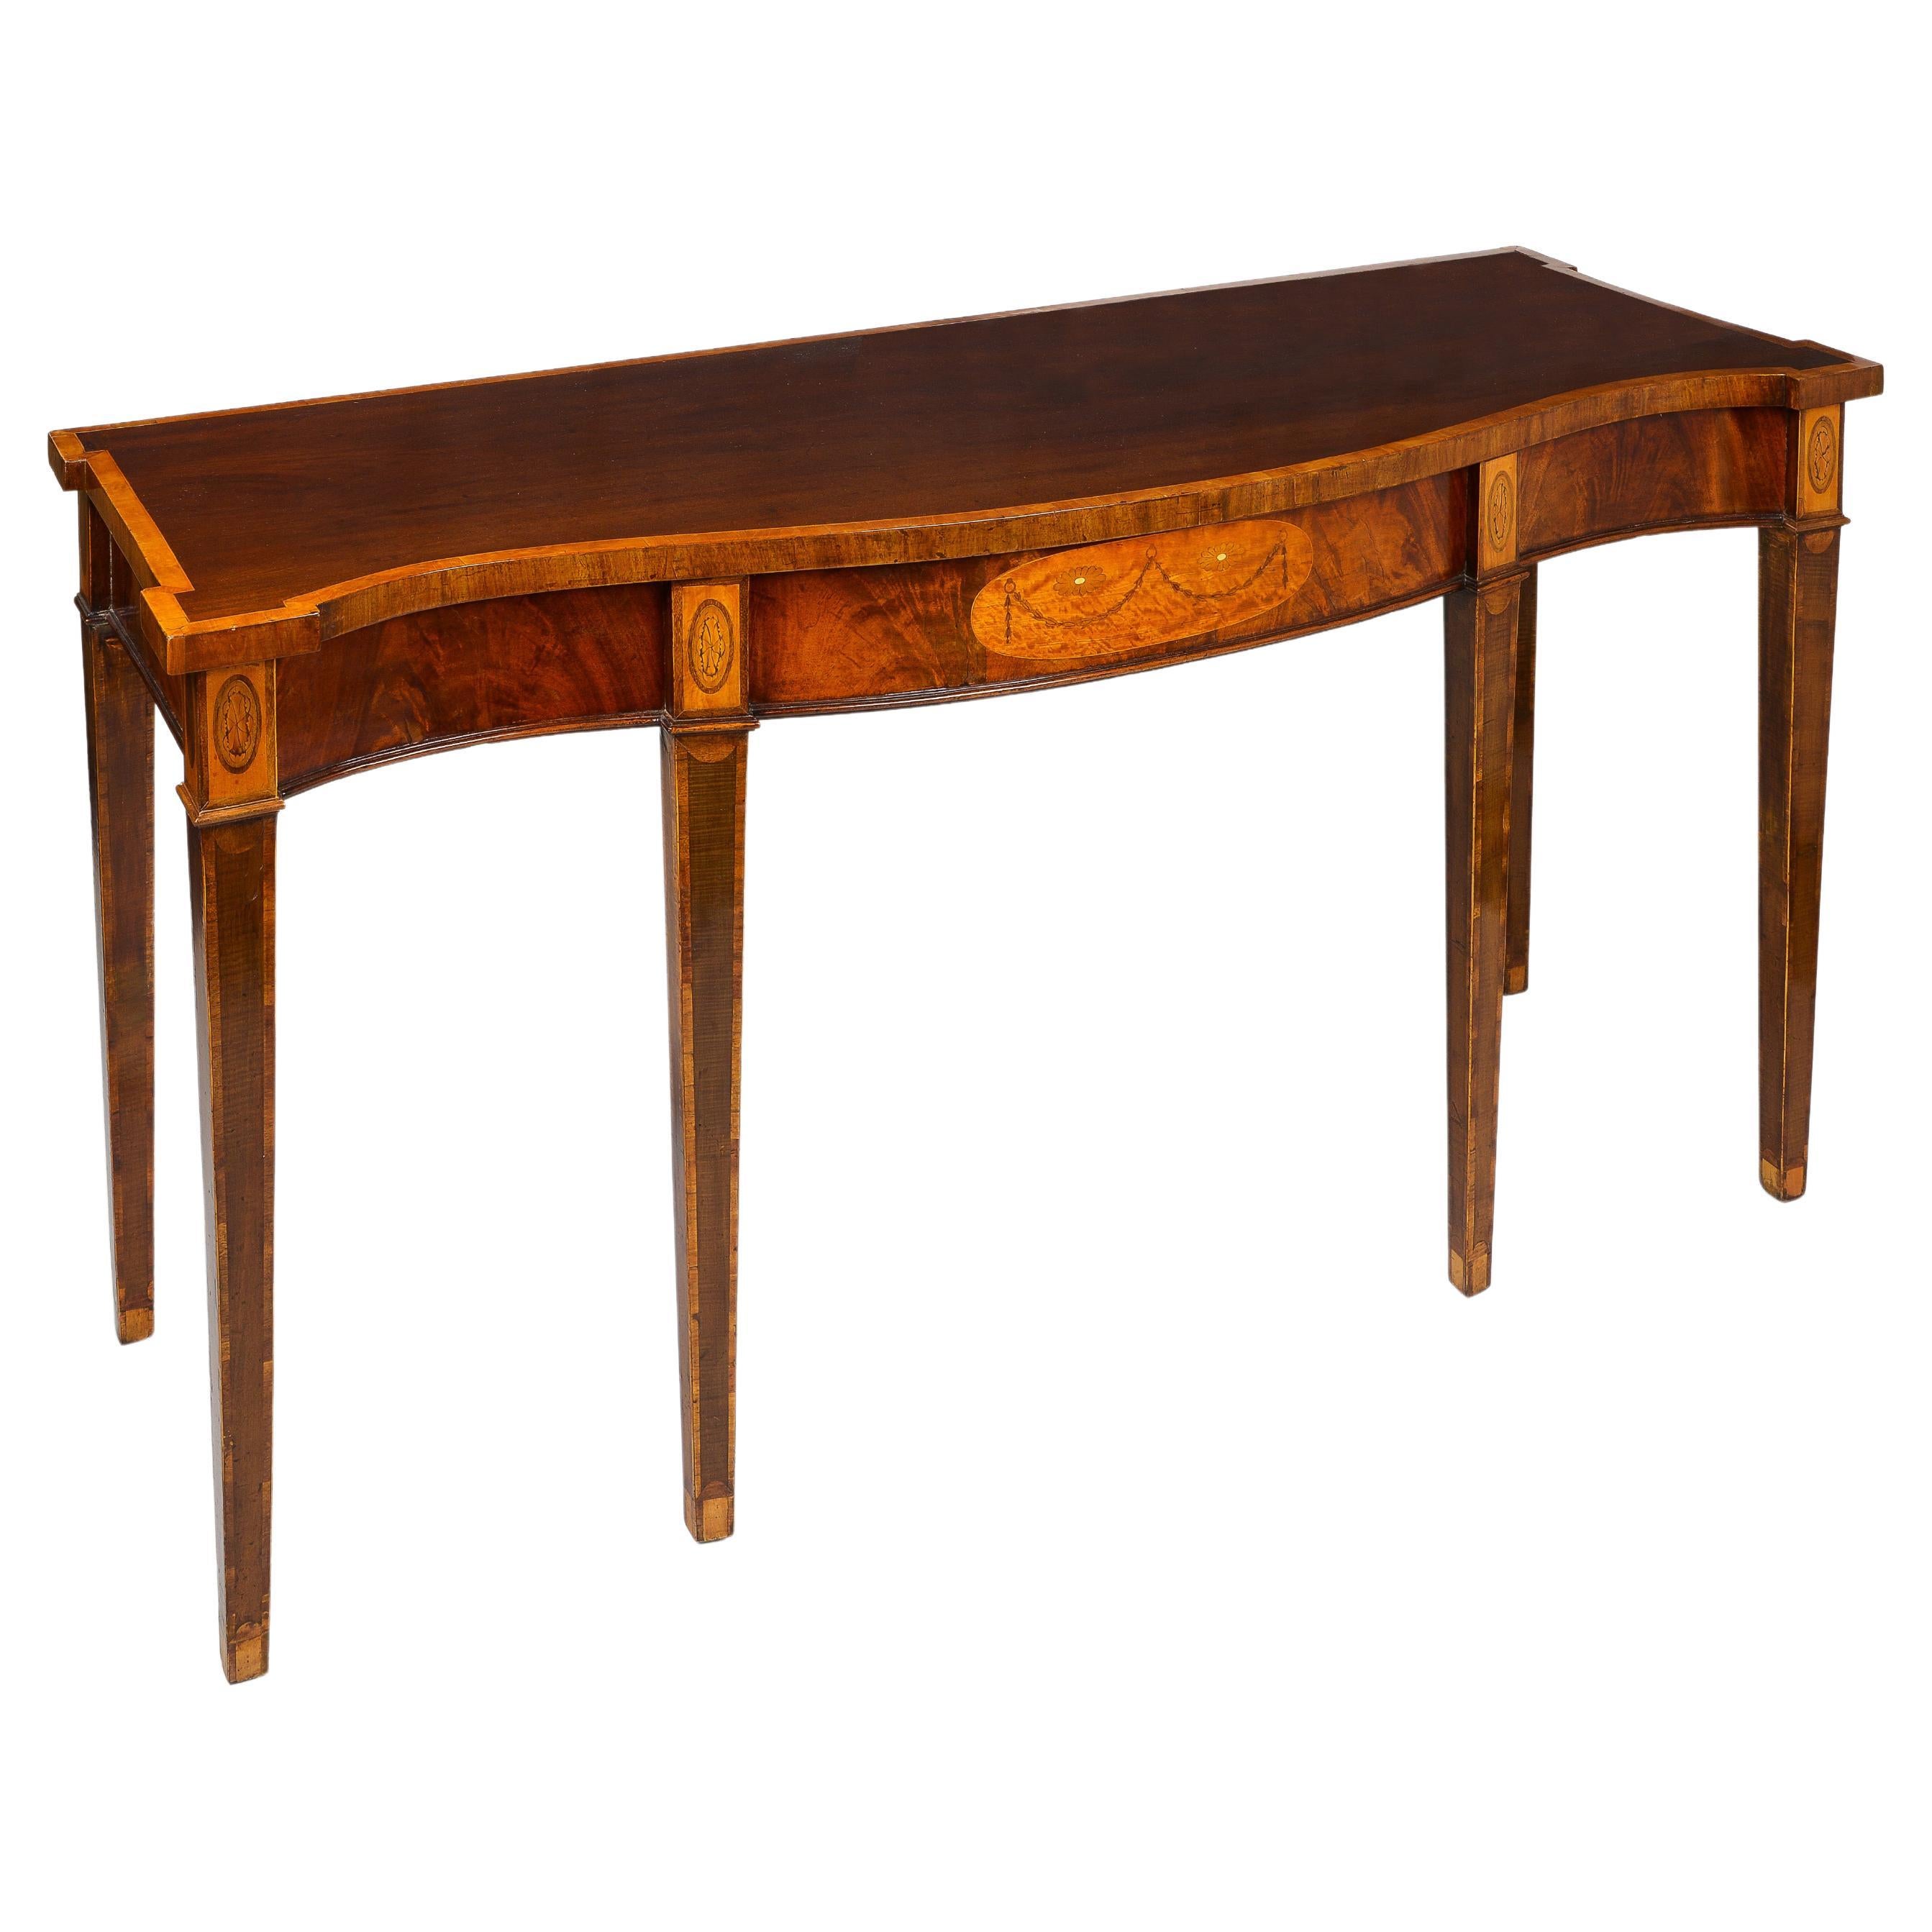 Fine George III Mahogany and Satinwood-Inlaid Serpentine Serving Table For Sale